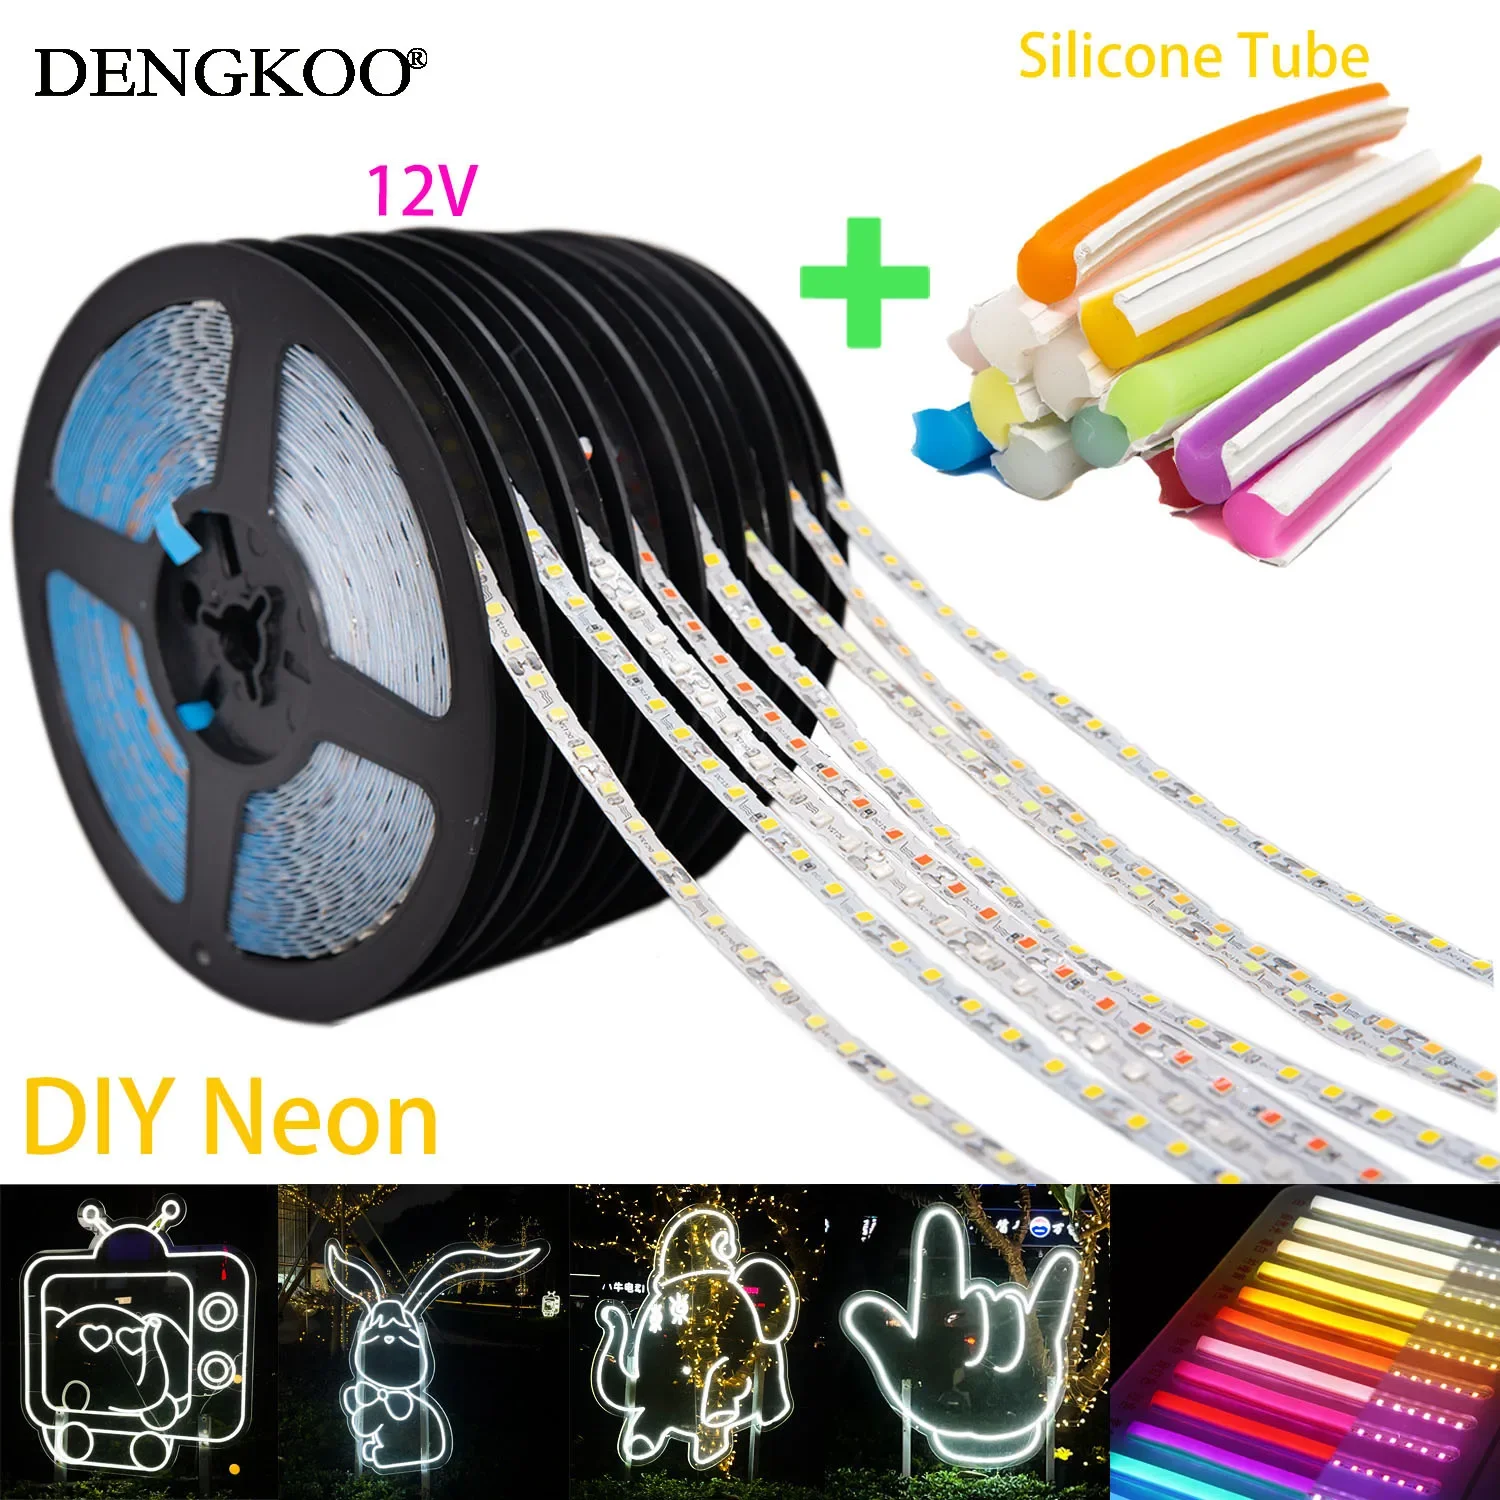 

DC12V 1m-20m DIY Neon Separate Silicone Neon Strip 6mm 8mm 12mm S Bendable Newly Flexible Led Tape LED Neon Sign Waterproof IP67